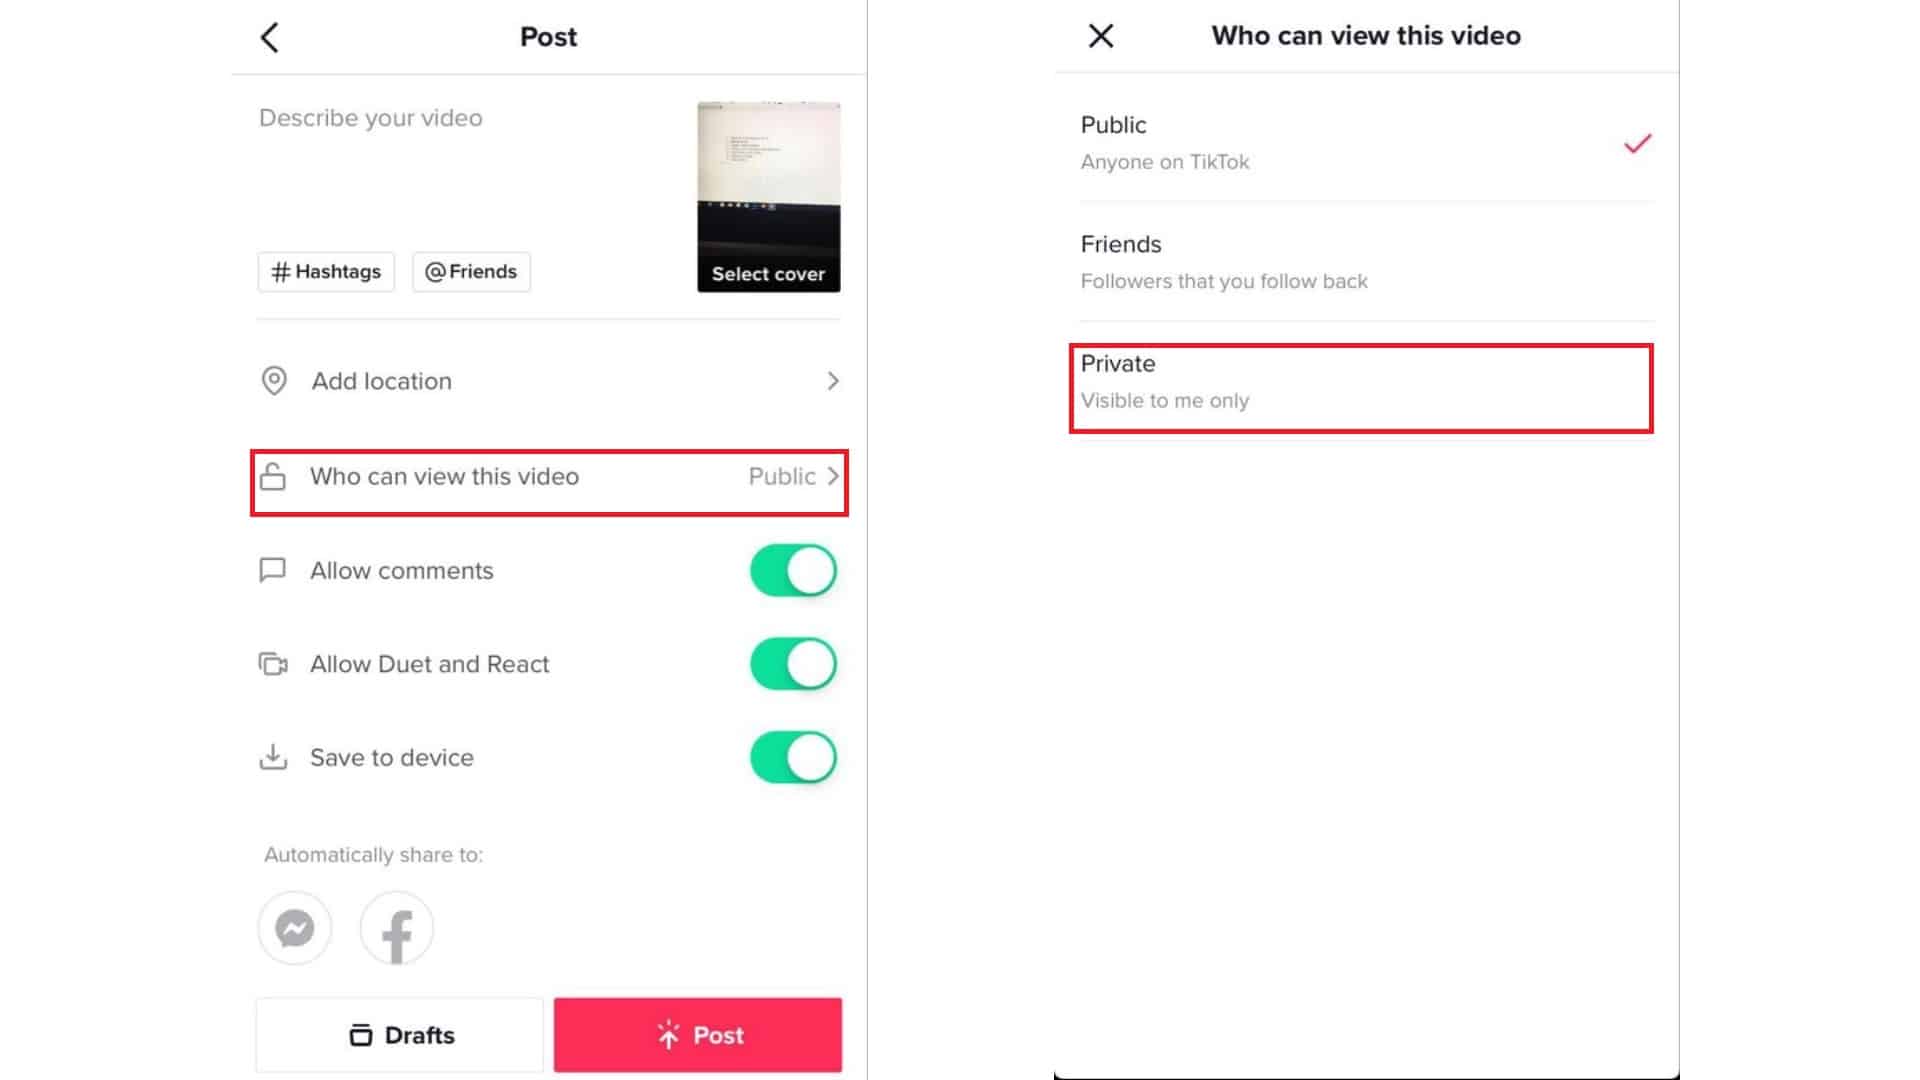 Create-a-Private-TikTok-Video-on-iPhone-2020-guide